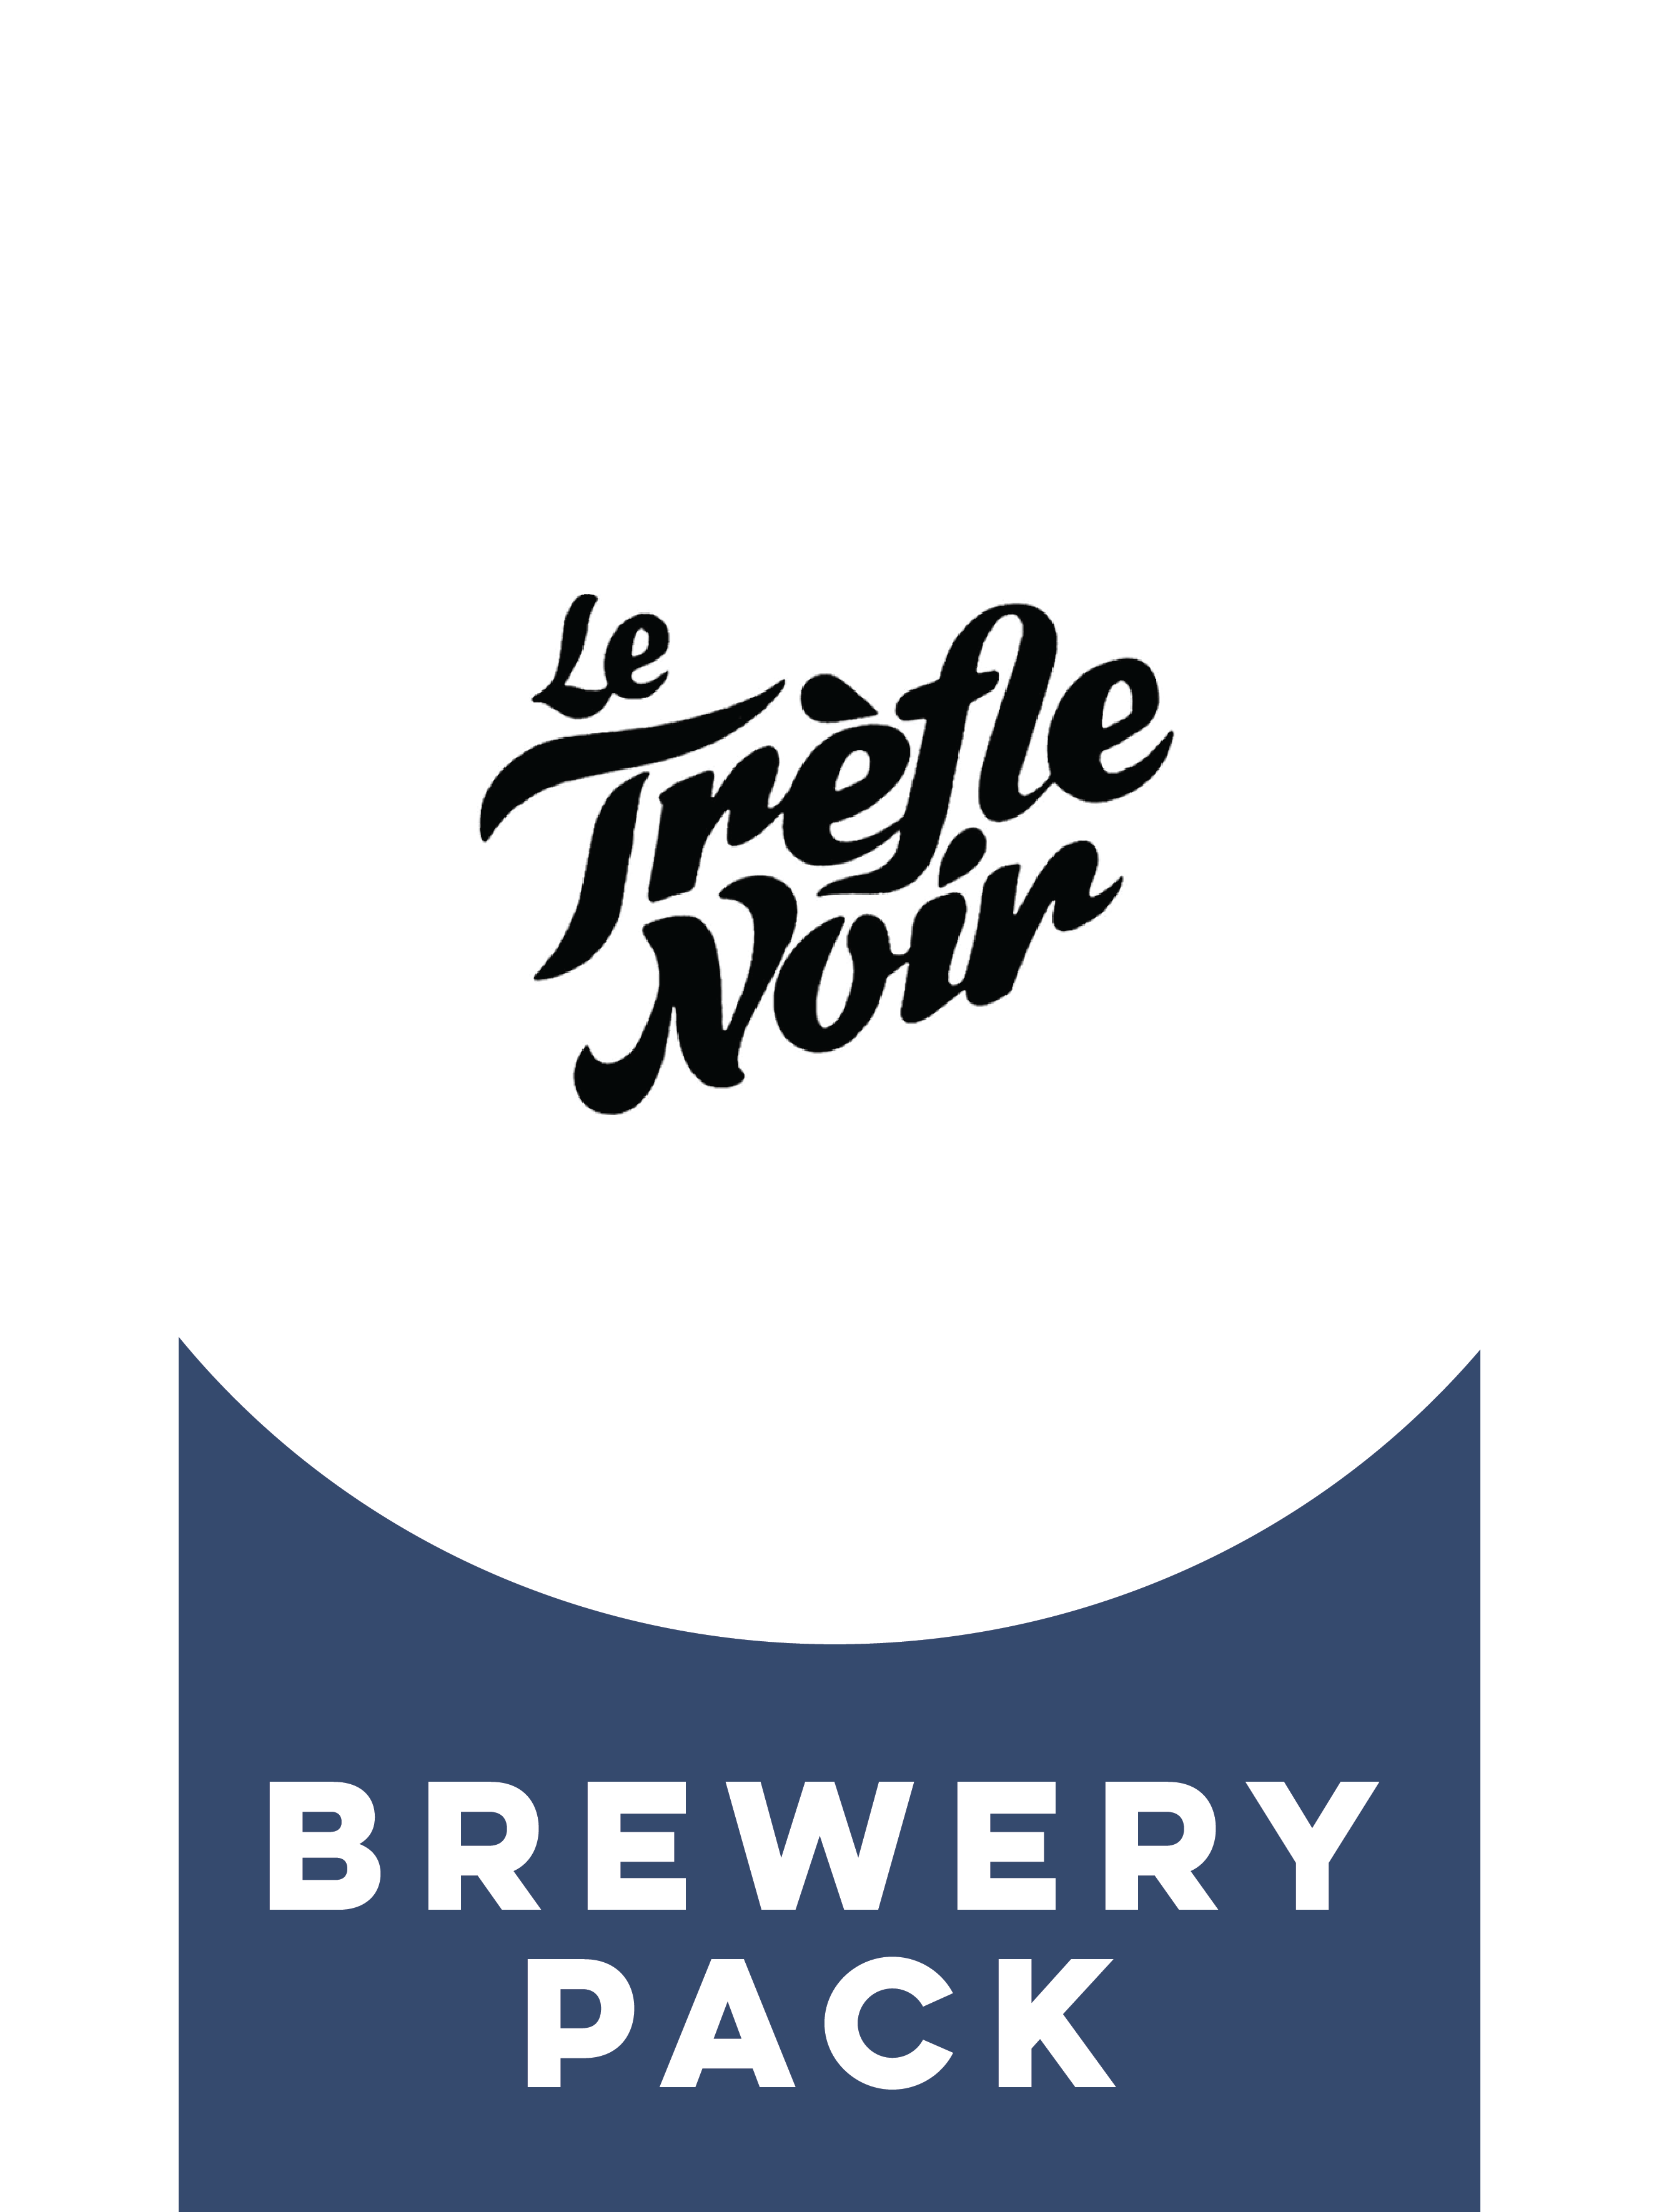 -Le Tréfle Noir- Le Tréfle Noir Brewery Pack-Packs & Cases- Only @ Beer Republic - The best online beer store for American & Canadian craft beer - Buy beer online from the USA and Canada - Bier online kopen - Amerikaans bier kopen - Craft beer store - Craft beer kopen - Amerikanisch bier kaufen - Bier online kaufen - Acheter biere online - IPA - Stout - Porter - New England IPA - Hazy IPA - Imperial Stout - Barrel Aged - Barrel Aged Imperial Stout - Brown - Dark beer - Blond - Blonde - Pilsner - Lager - Whe